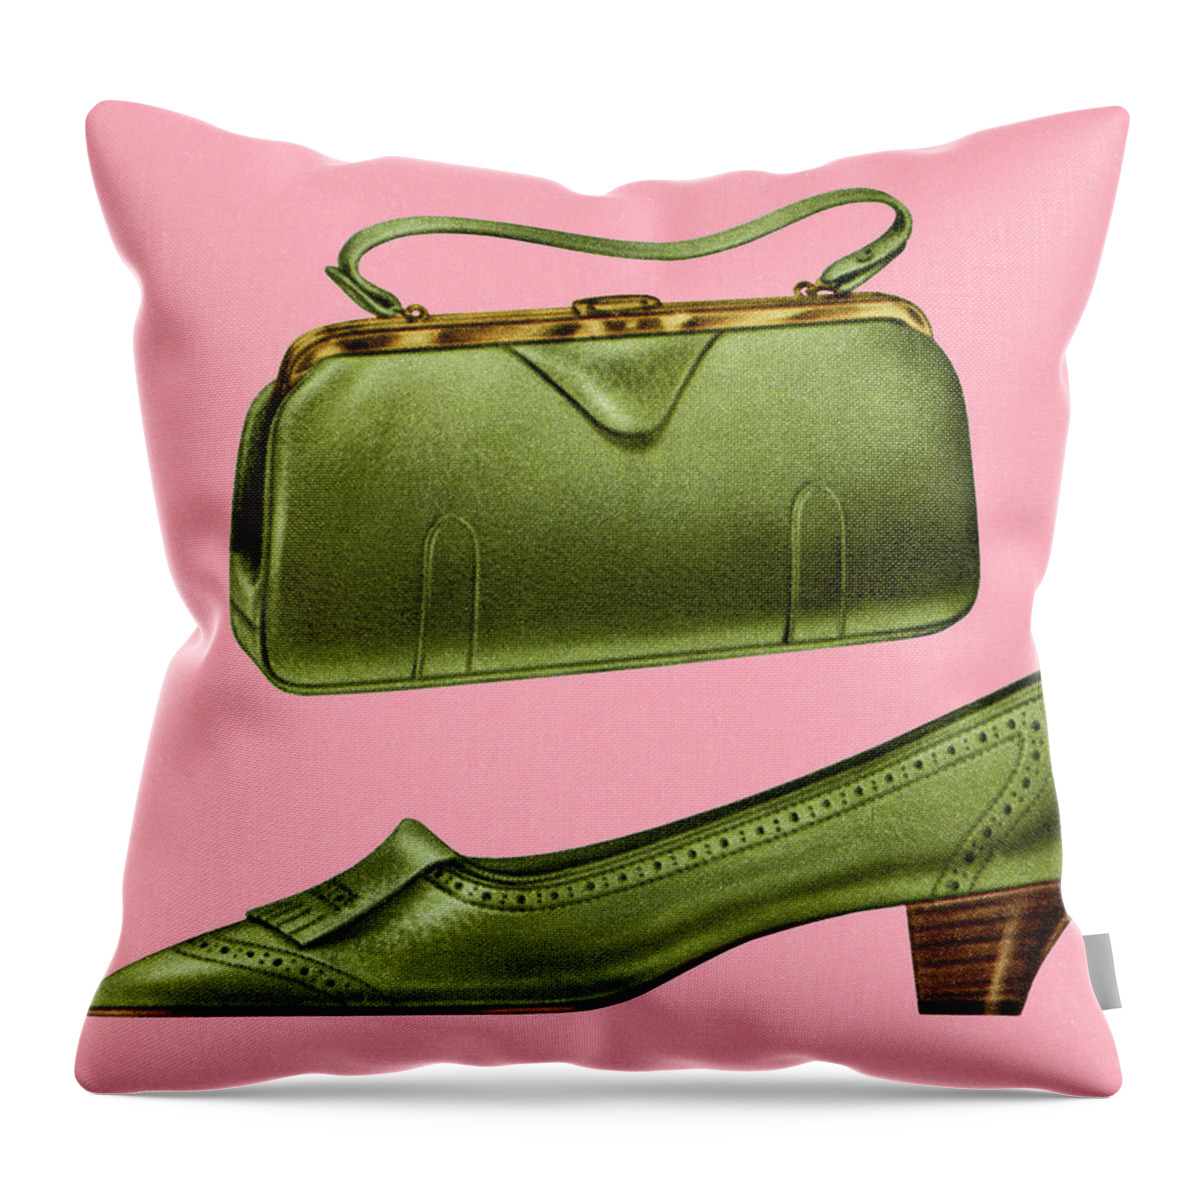 Accessories Throw Pillow featuring the drawing Matching Green Pumps and Handbag by CSA Images